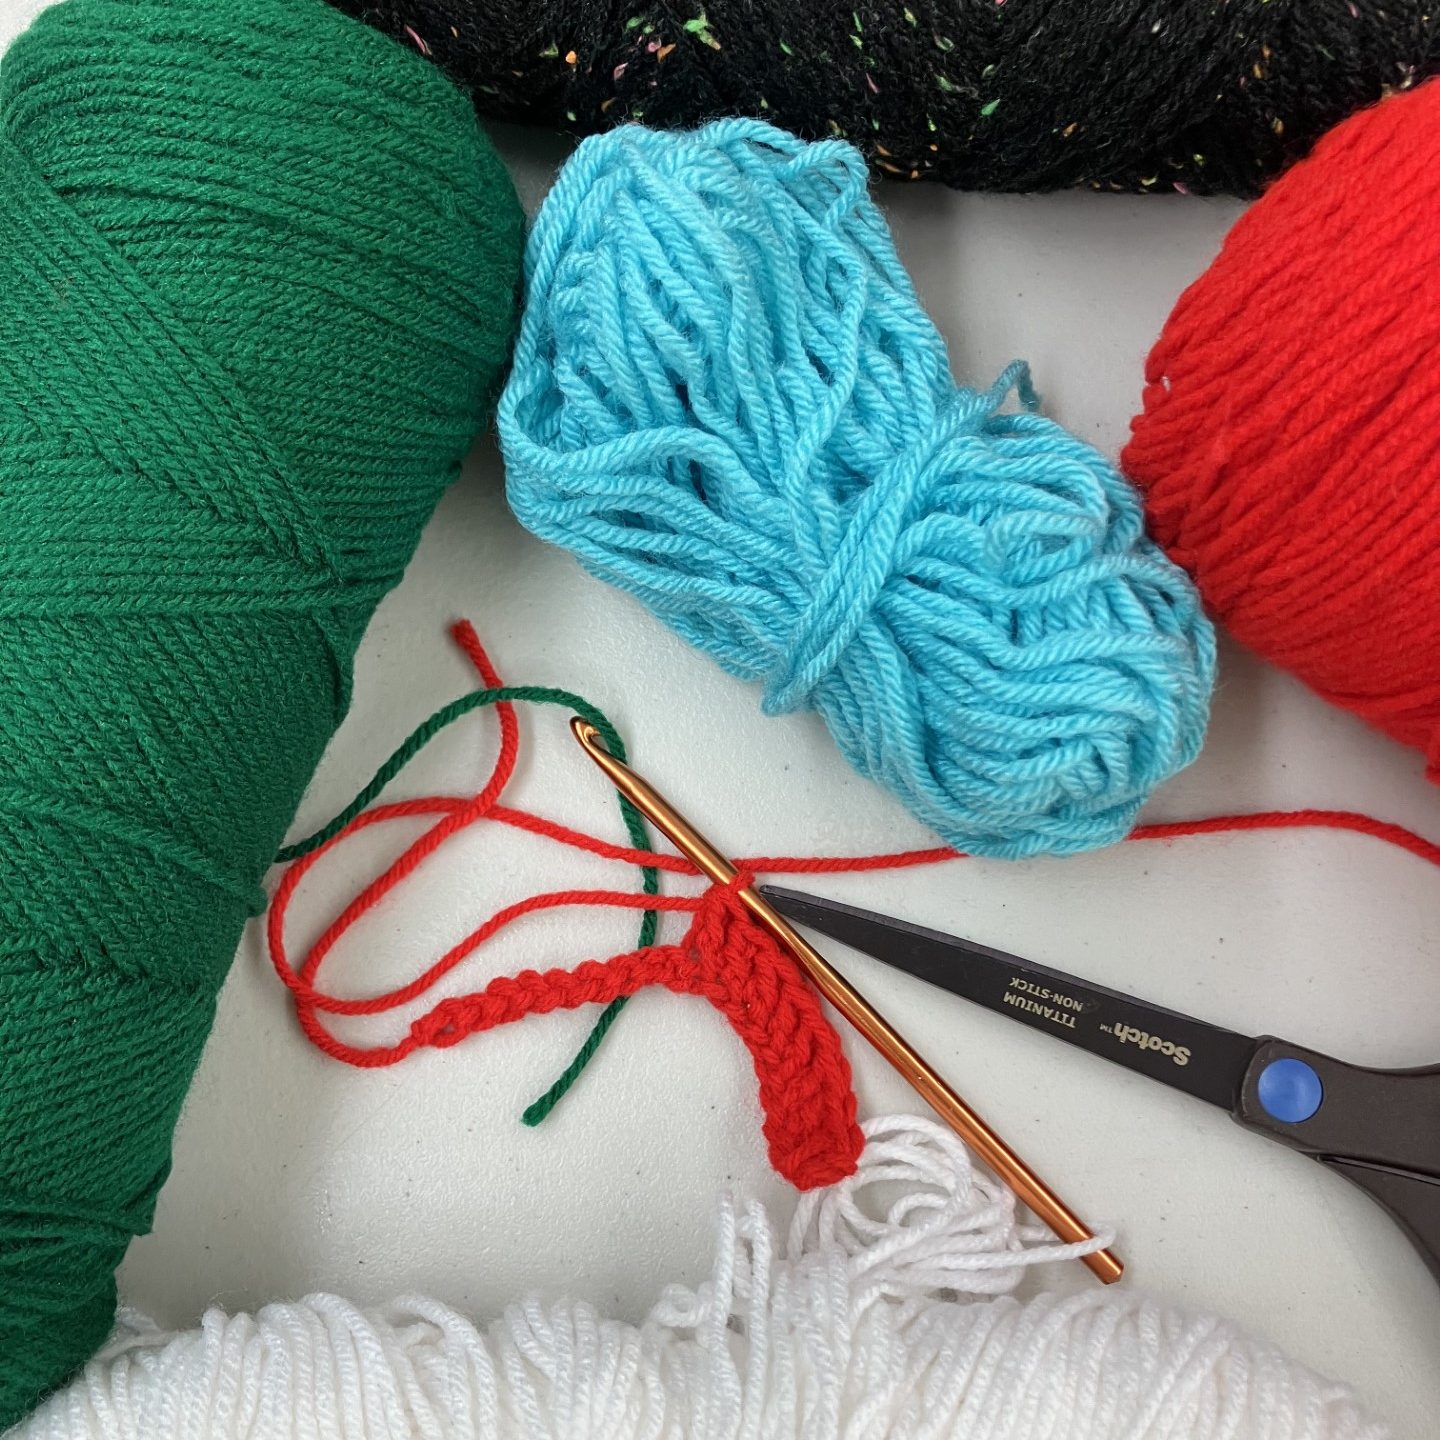 assortment of yarns in different colors with a pair of scissor and crochet needle starting a project